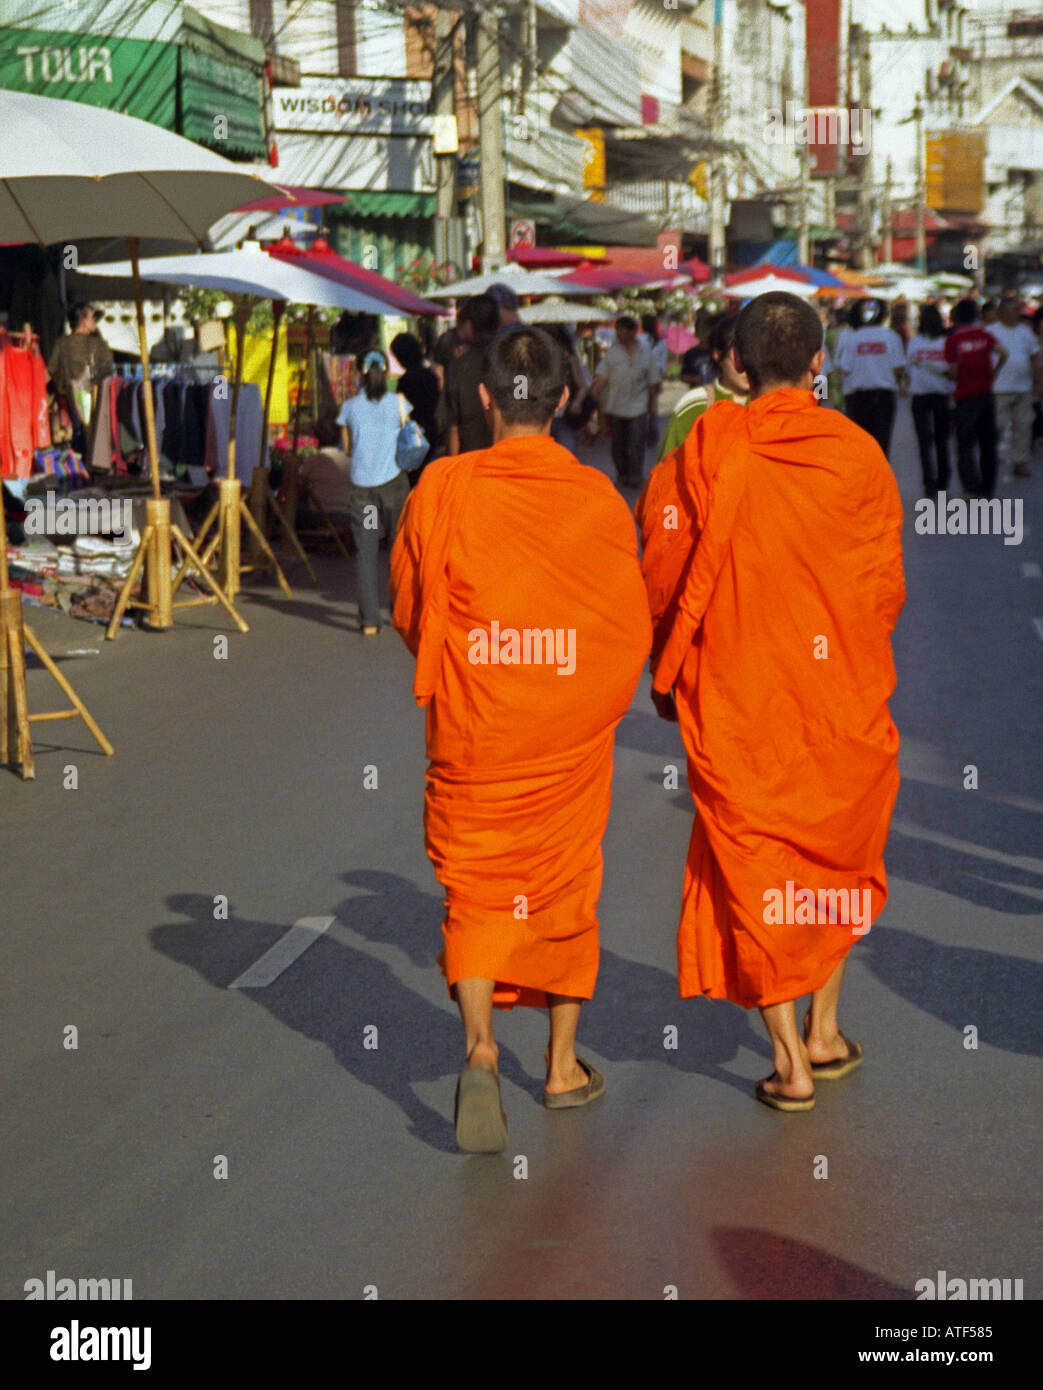 Pair of shaved head novices traditional colourful robe walk march together Anusan Market Chiang Mai Thailand Southeast Asia Stock Photo